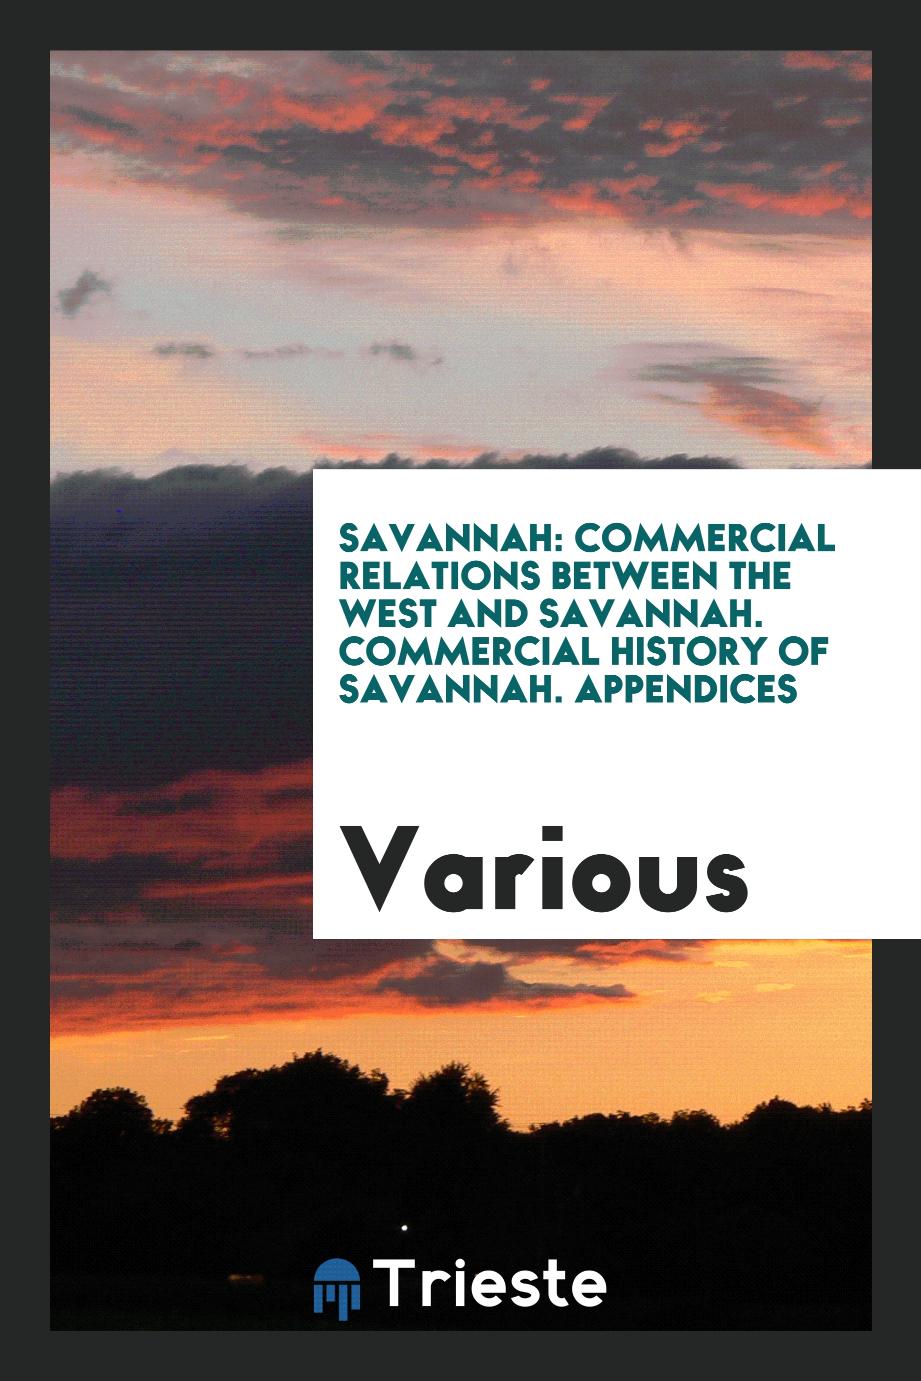 Savannah: Commercial Relations Between the West and Savannah. Commercial History of Savannah. Appendices